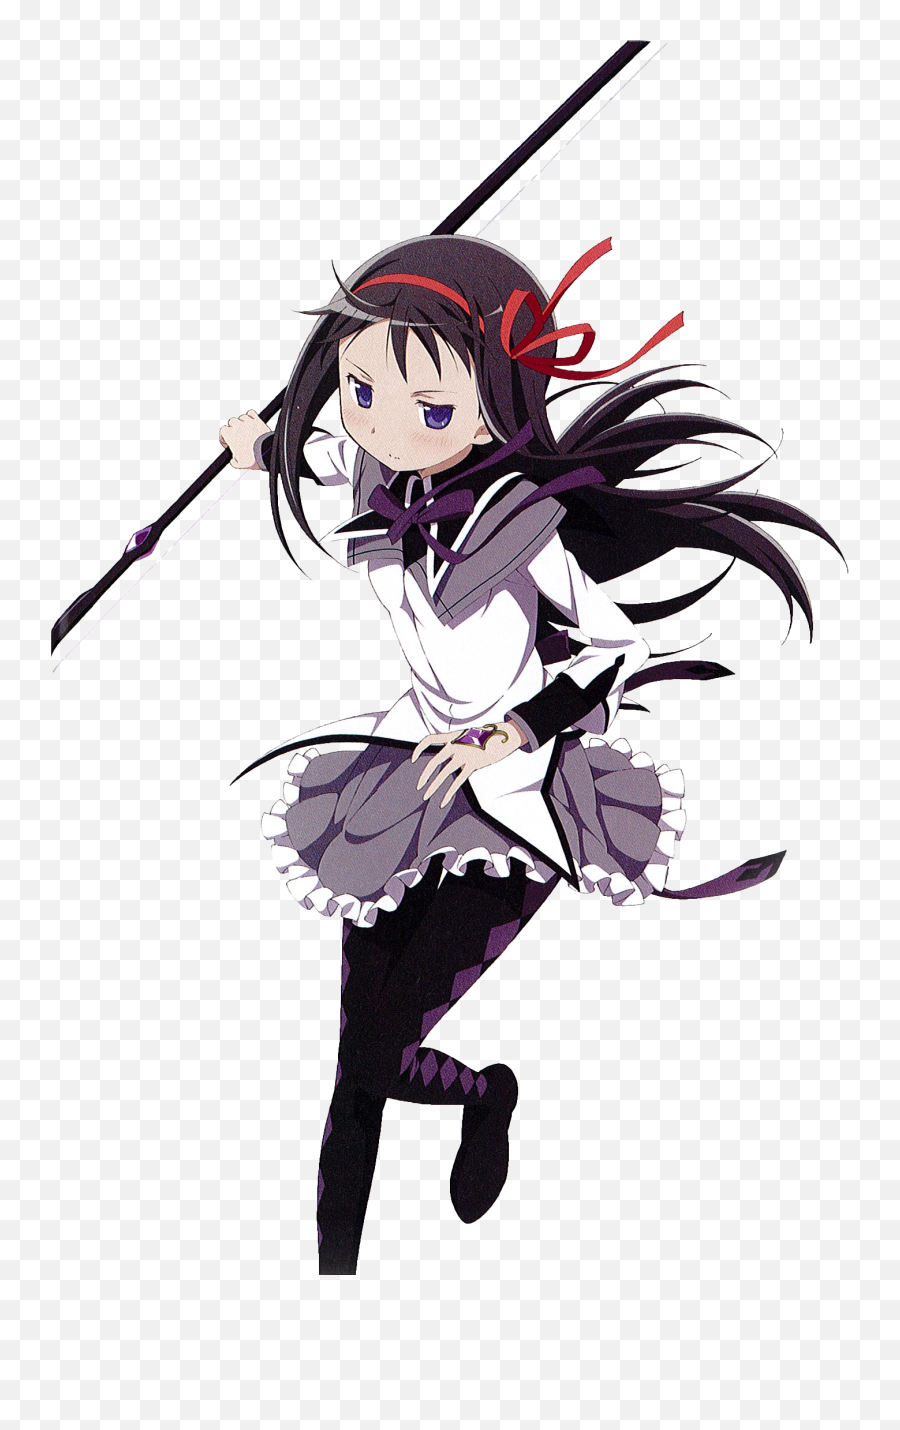 Homura Akemi Only You Renders - Akemi Homura Render Emoji,Do You Want To Make A Contract Kyubey Emoticon